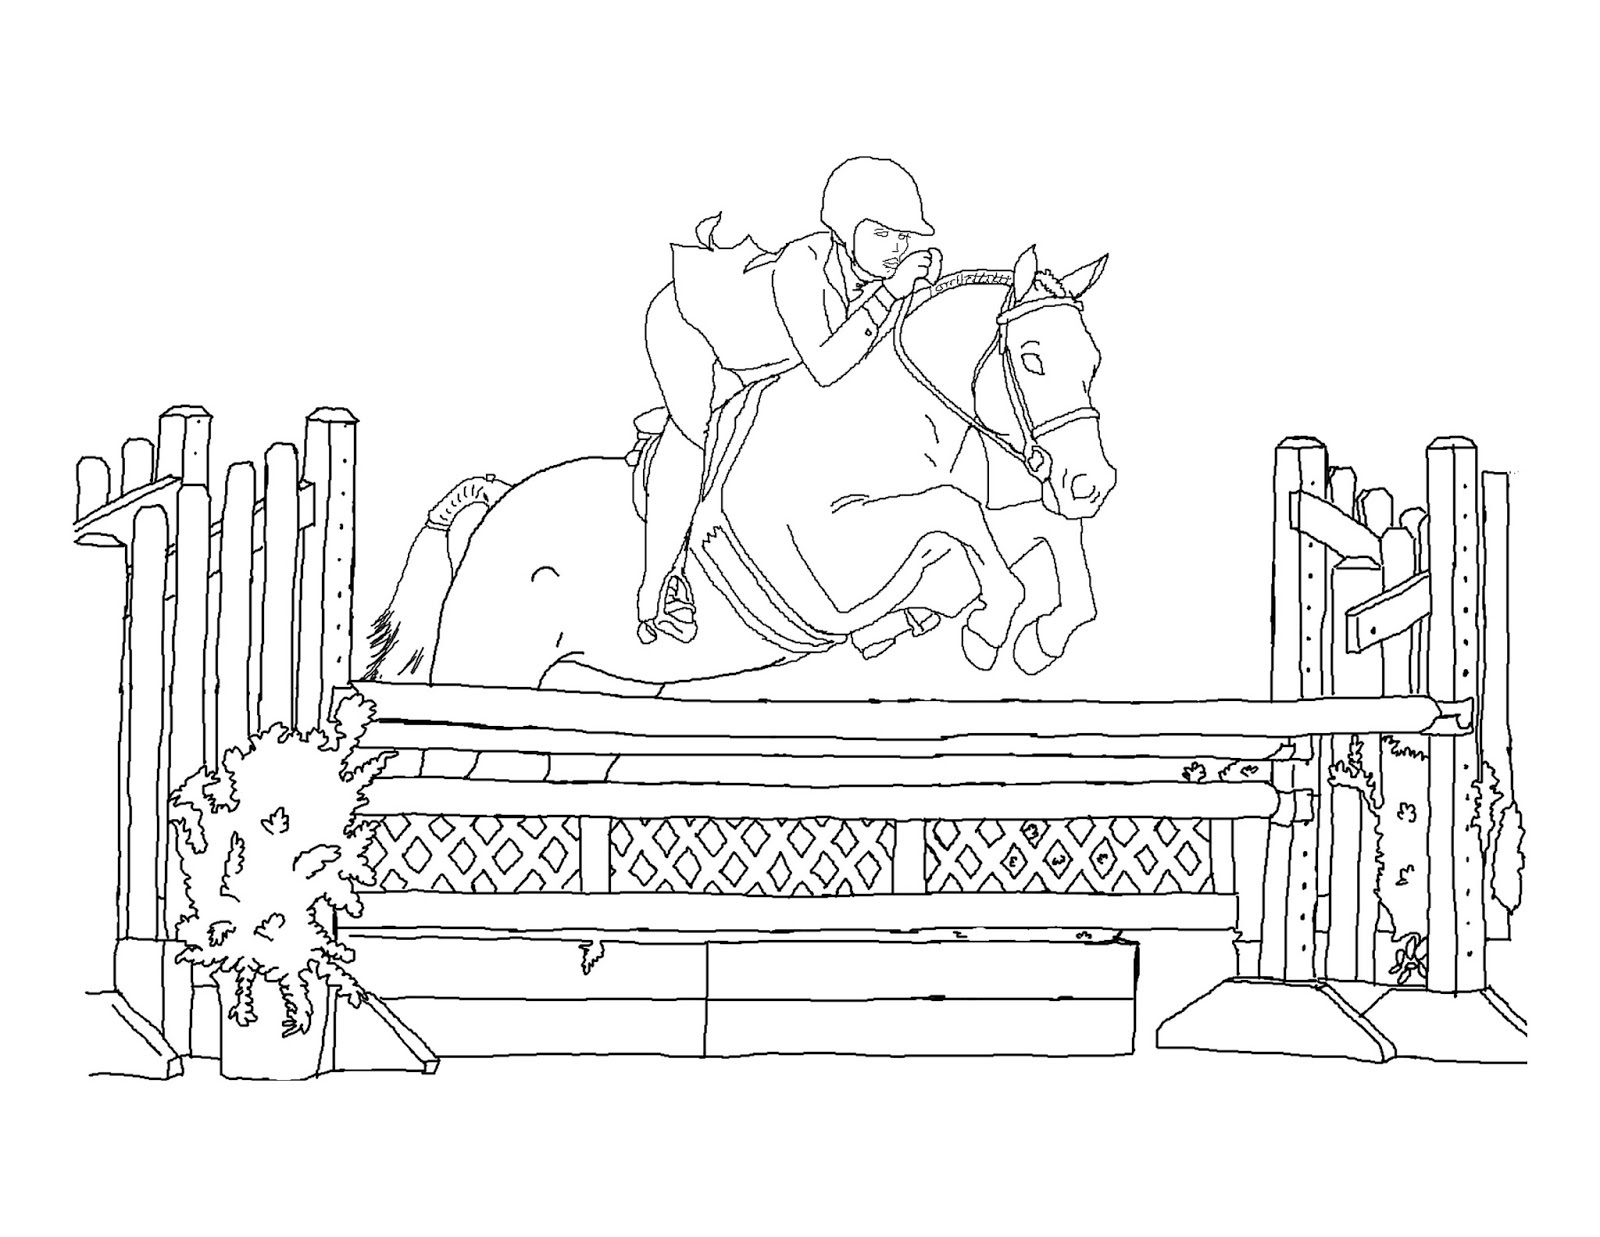 types of sports coloring pages for kids horse riding coloring kids sheets.jpg